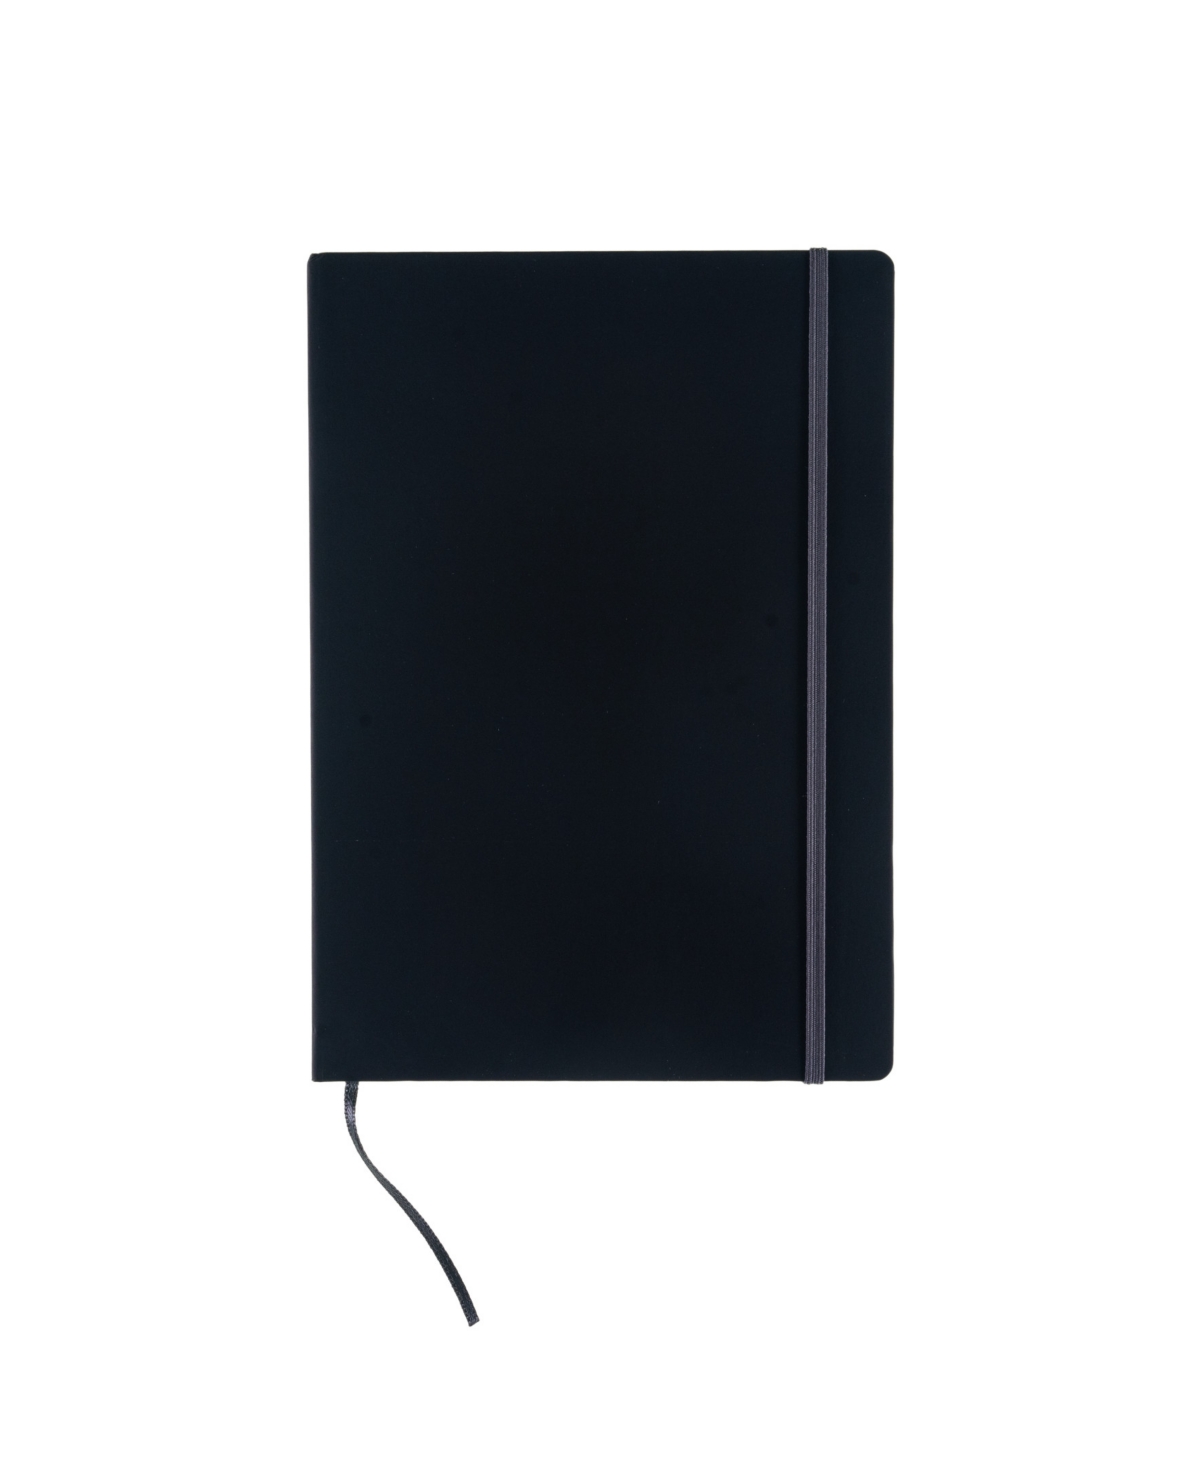 Ispira Hard Cover Lined A5 Notebook, 5.8" x 8.3" - Black